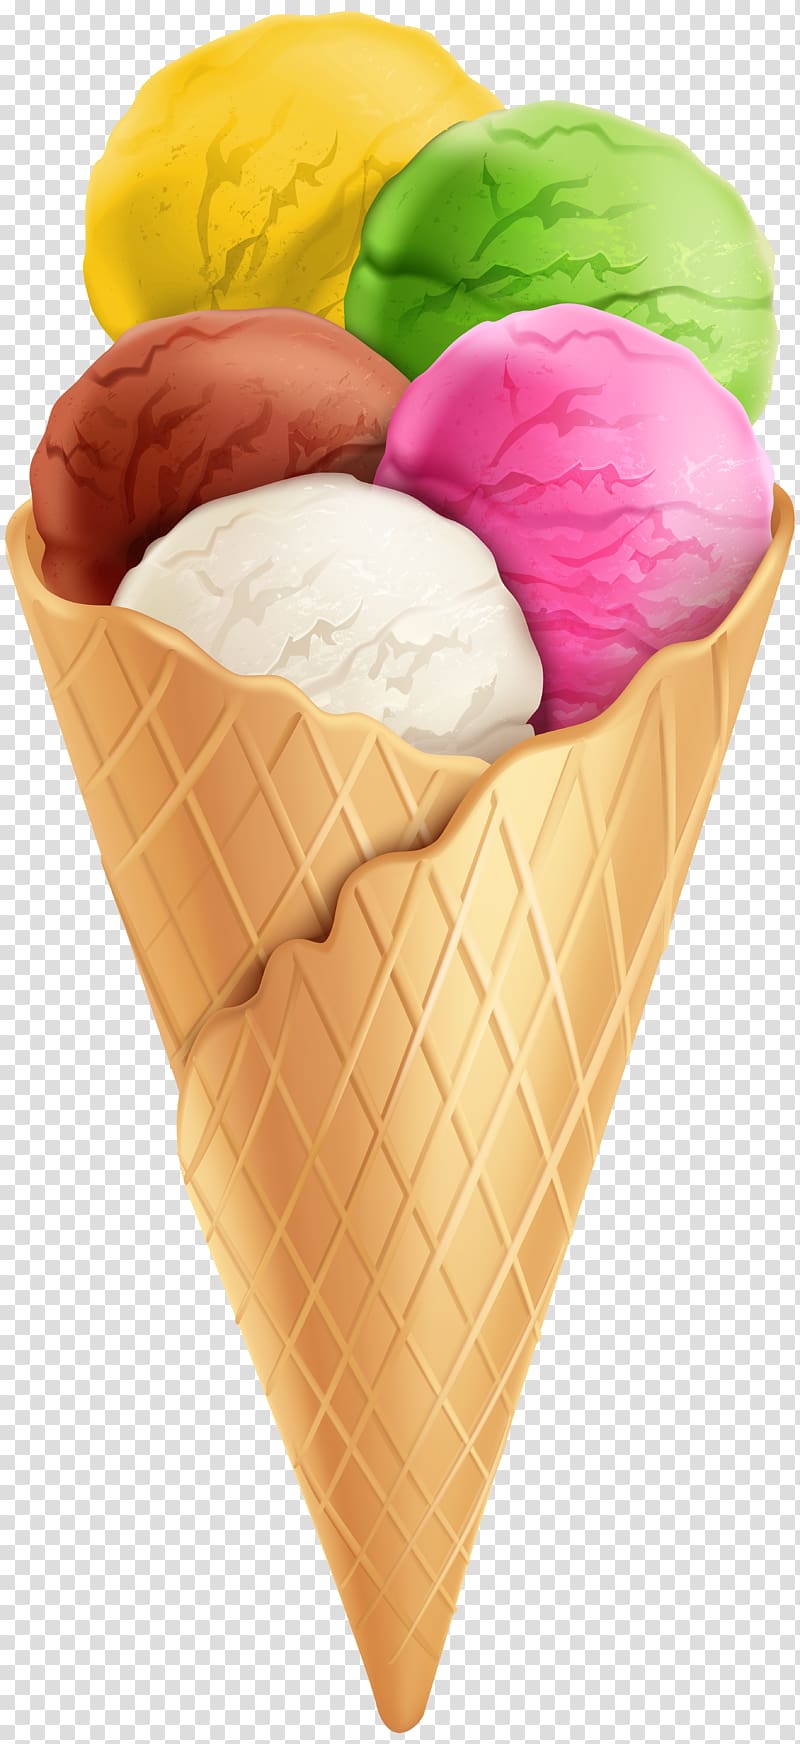 ice creme with cone, Ice cream cone Chocolate ice cream Neapolitan ice cream, Ice Cream transparent background PNG clipart